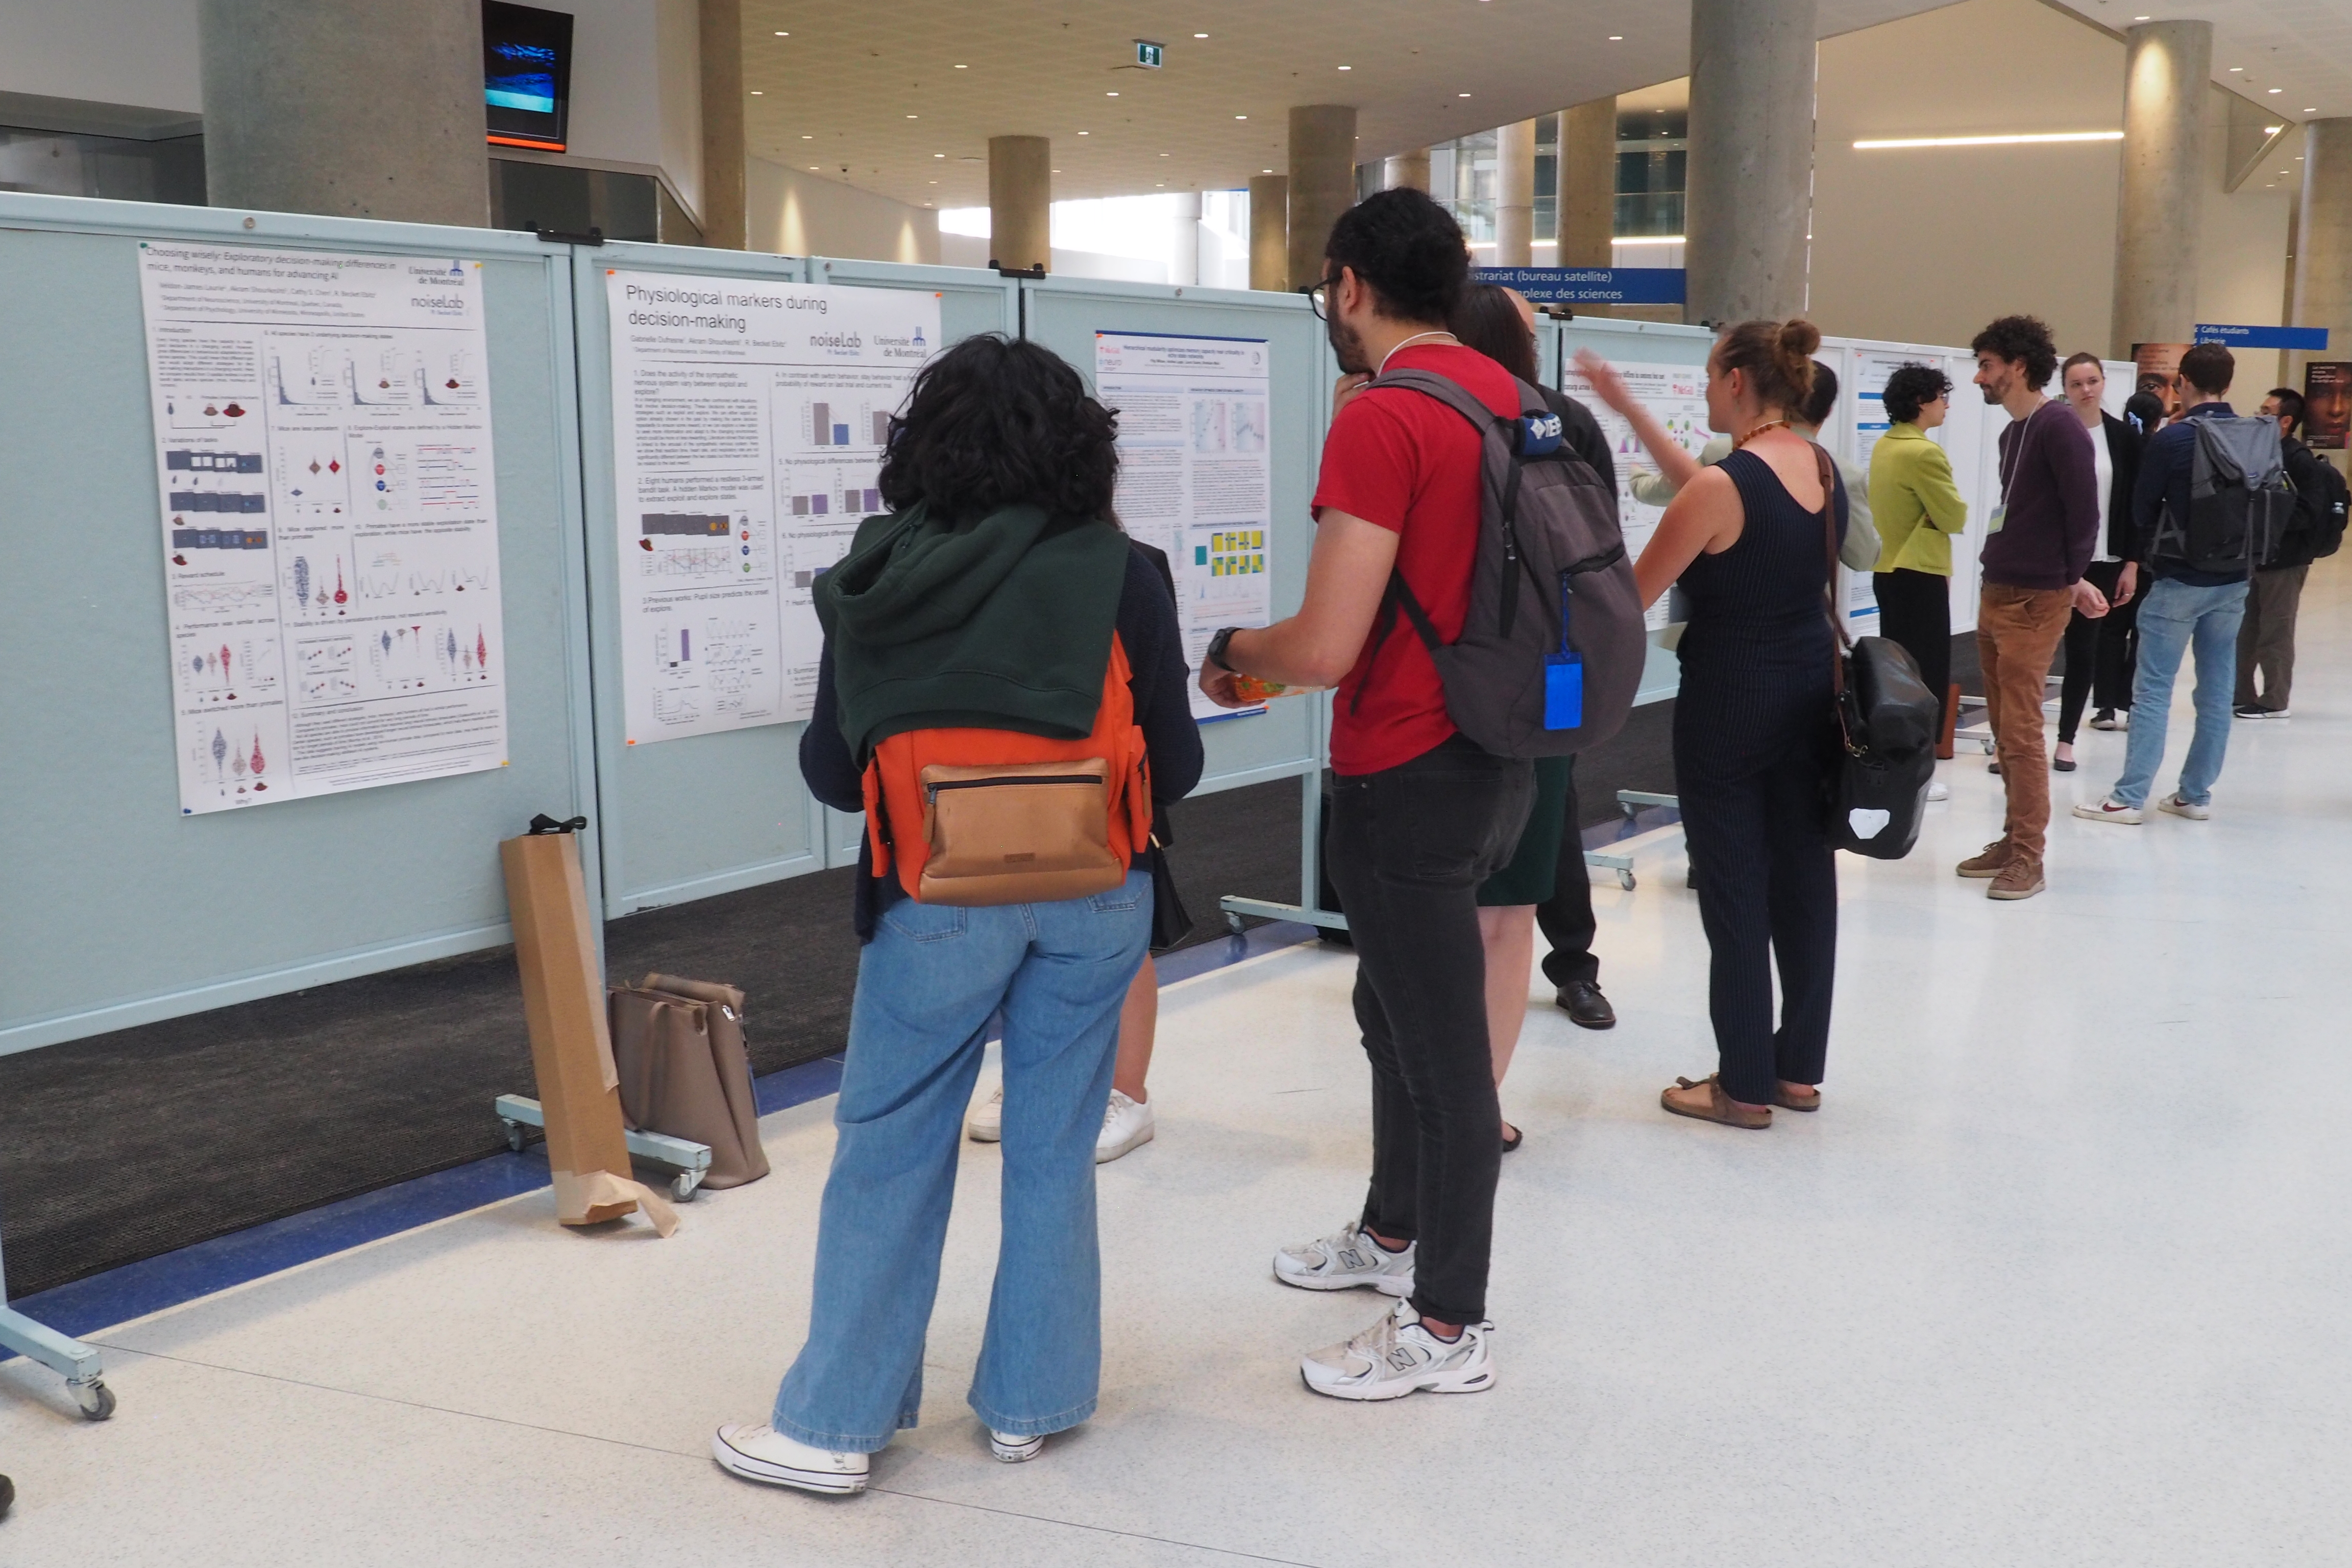 Another image taken at the poster session